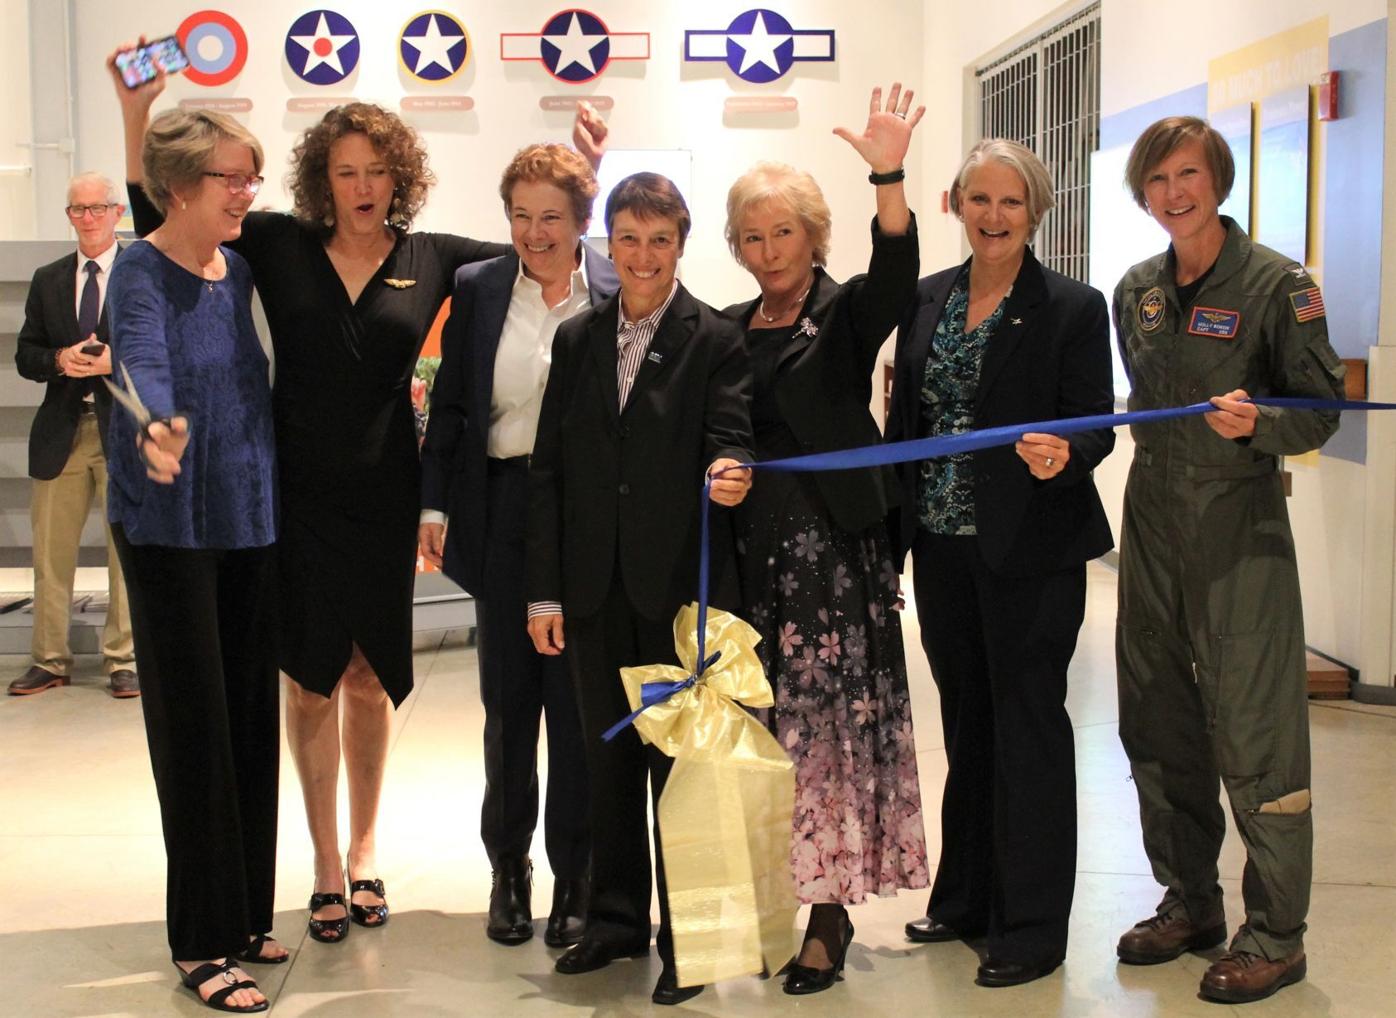 Ribbon cutting event officially opens Women in Aviation exhibit